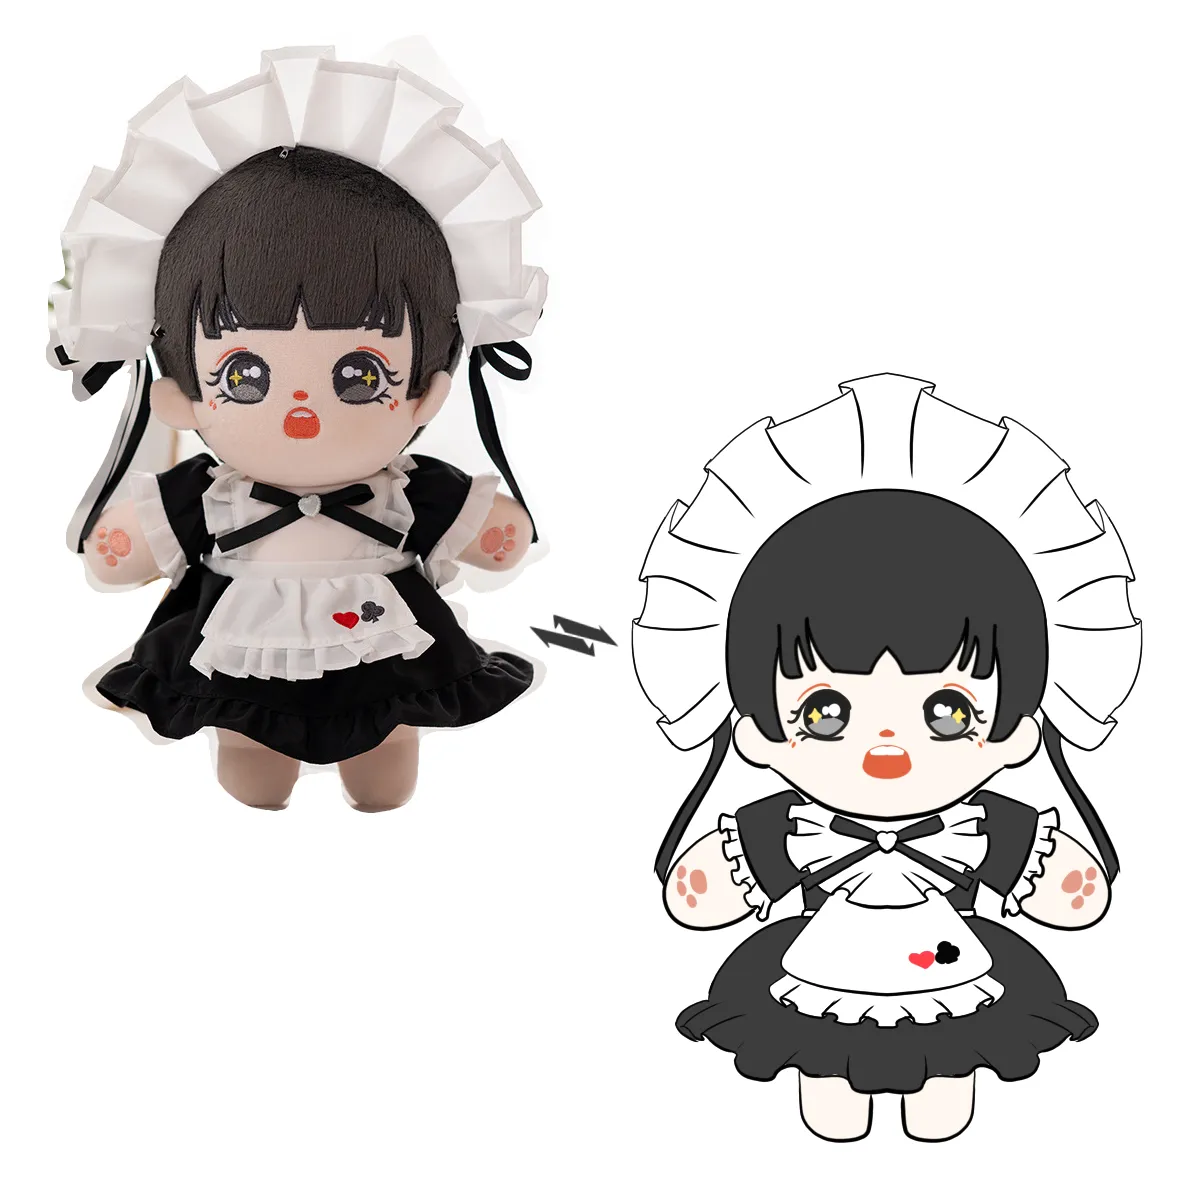 Gaopeng high quality Custom Super Soft Small Plush With Your Logo Custom Plush maid outfit Kpop idol dolls